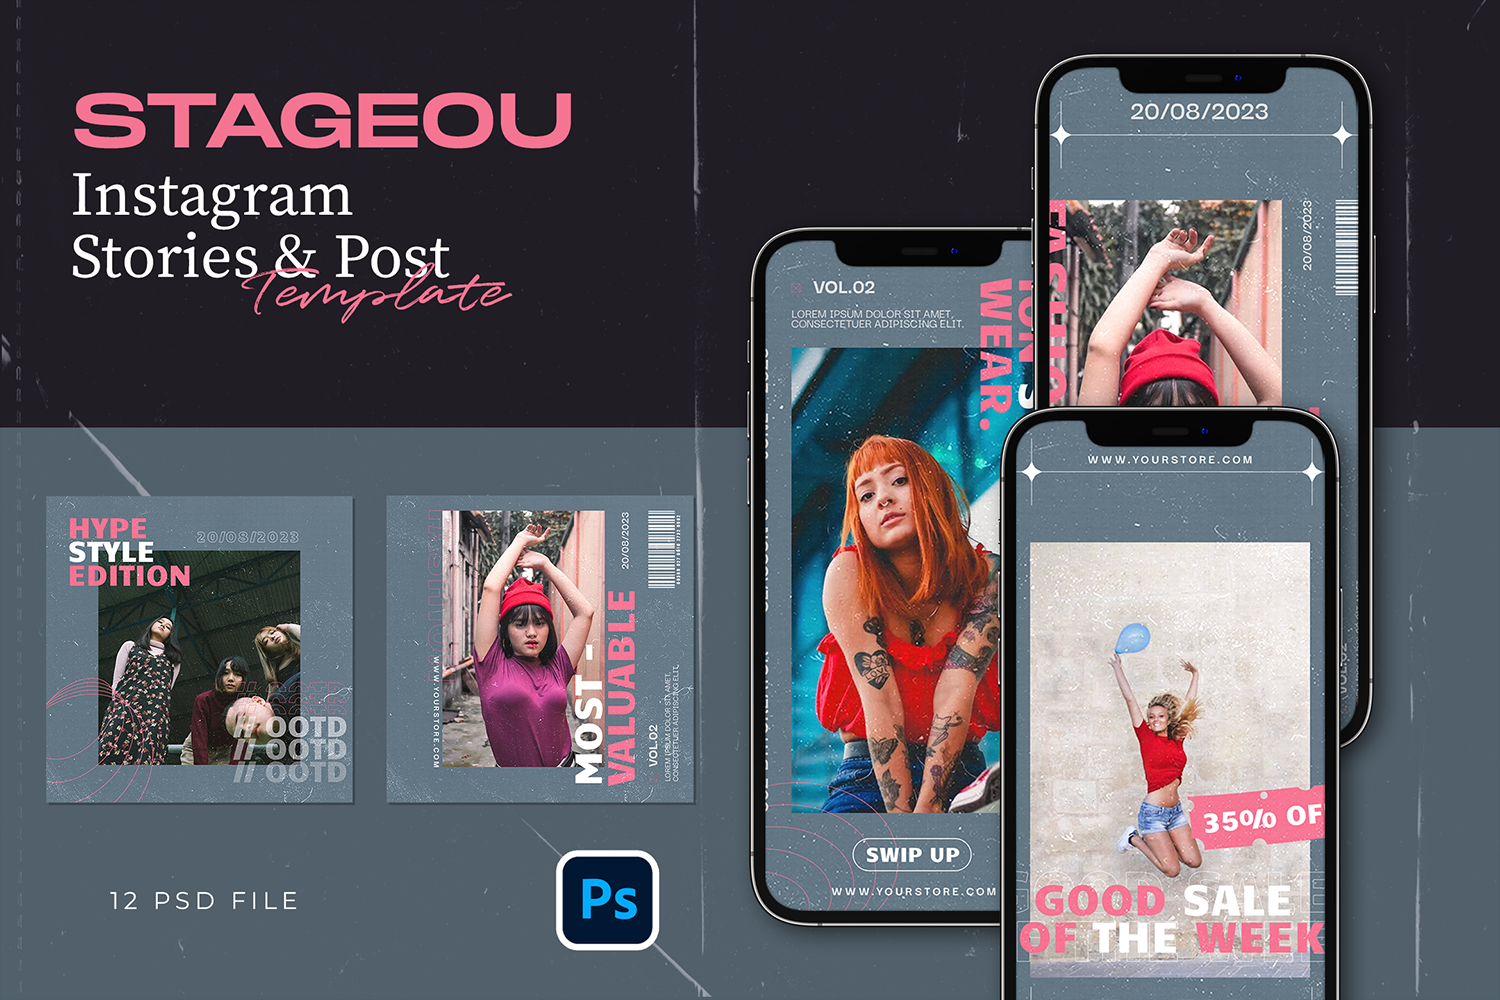 Hype Instagram Template - Stageou